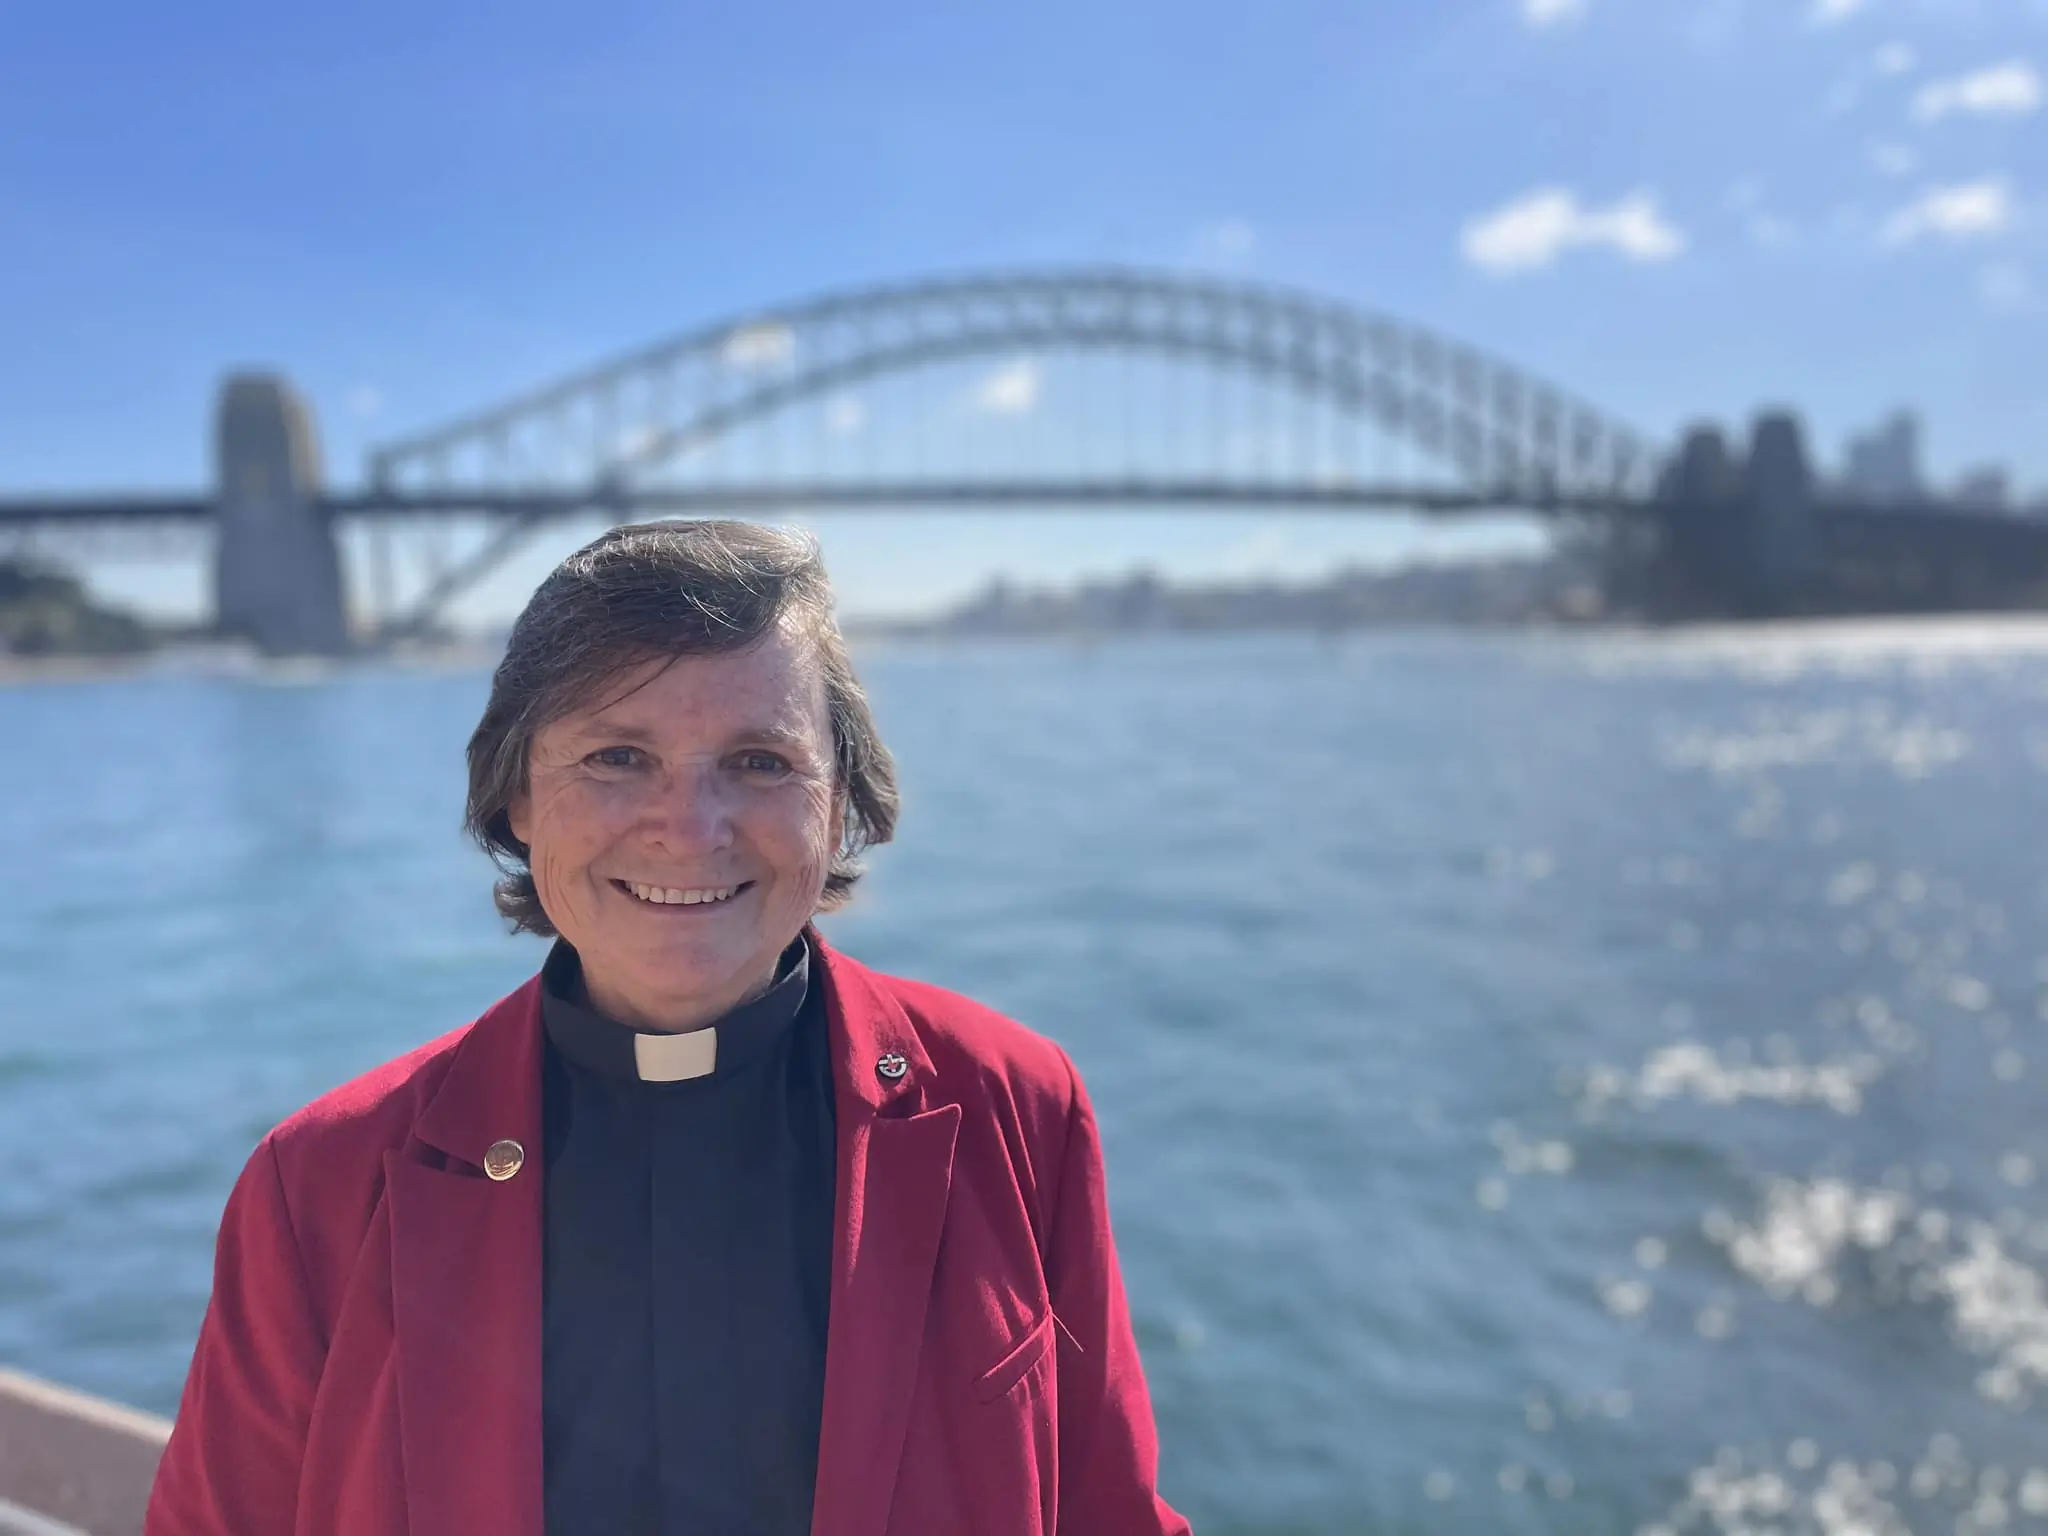 Rev. Tara Curlewis of the Uniting Church in Australia has been appointed as the Reformed Ecumenical Officer for the World Communion of Reformed Churches (WCRC) and as the new minister of St. Andrew’s Church in Rome